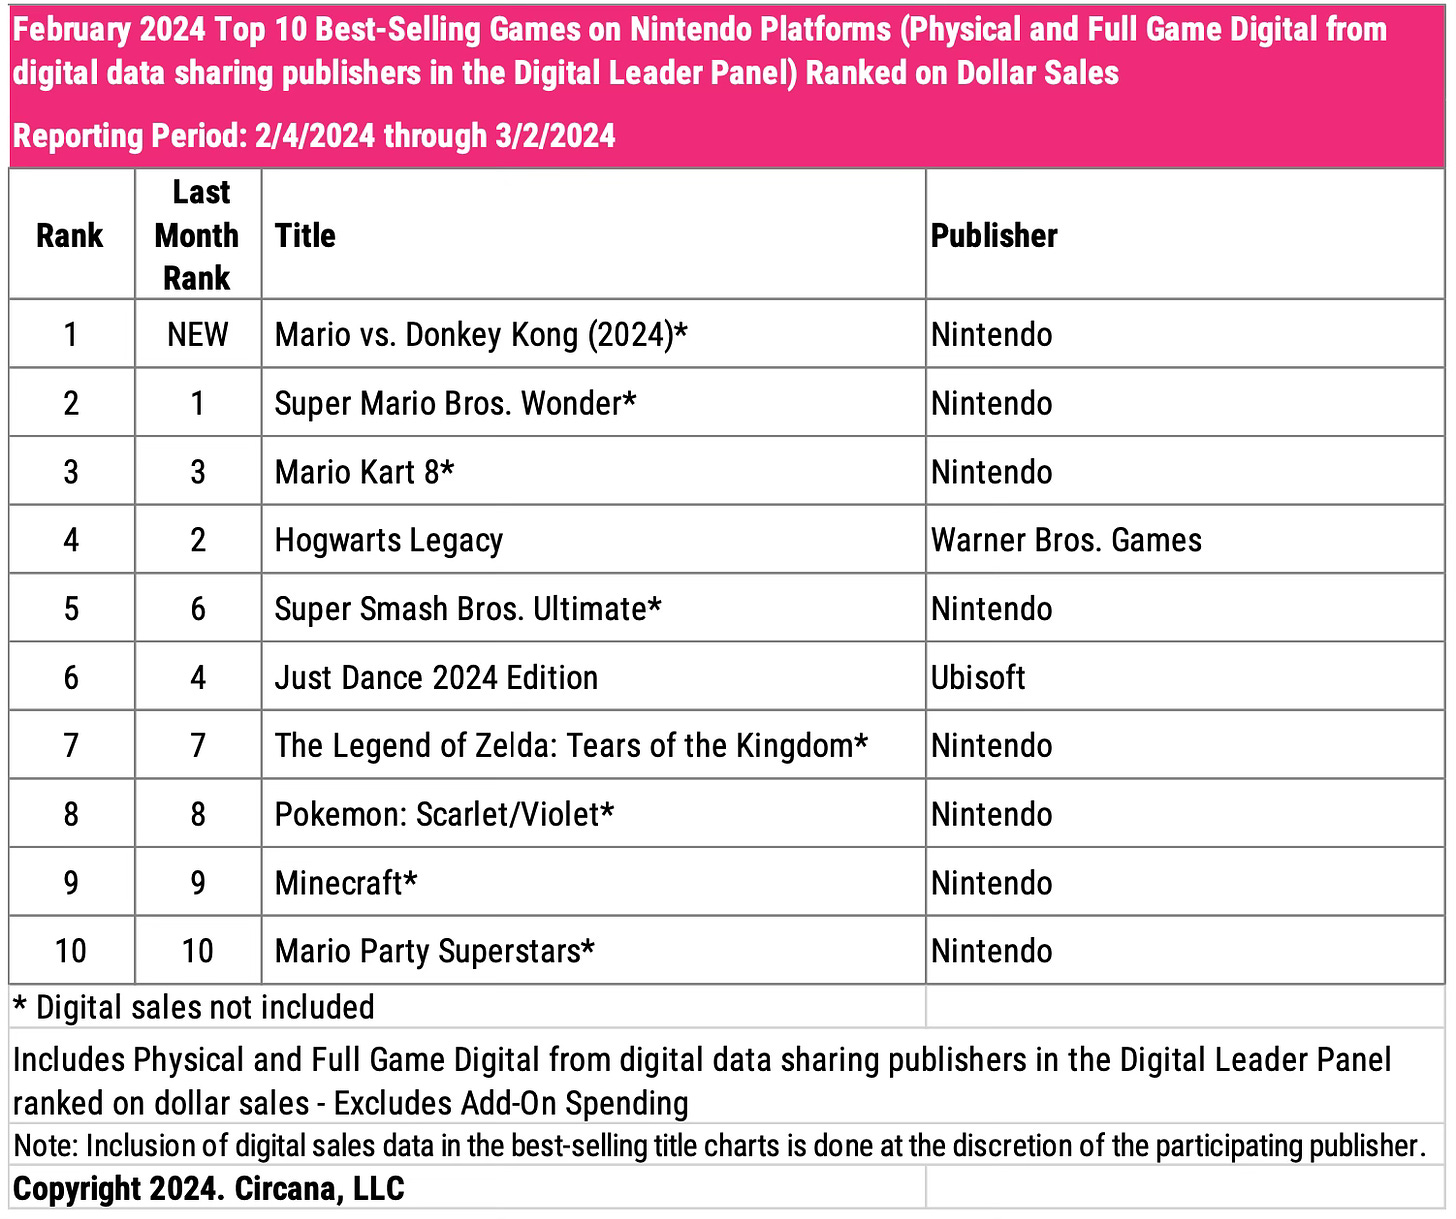 Chart showing the top 10 best-selling games on Nintendo platforms in February 2024